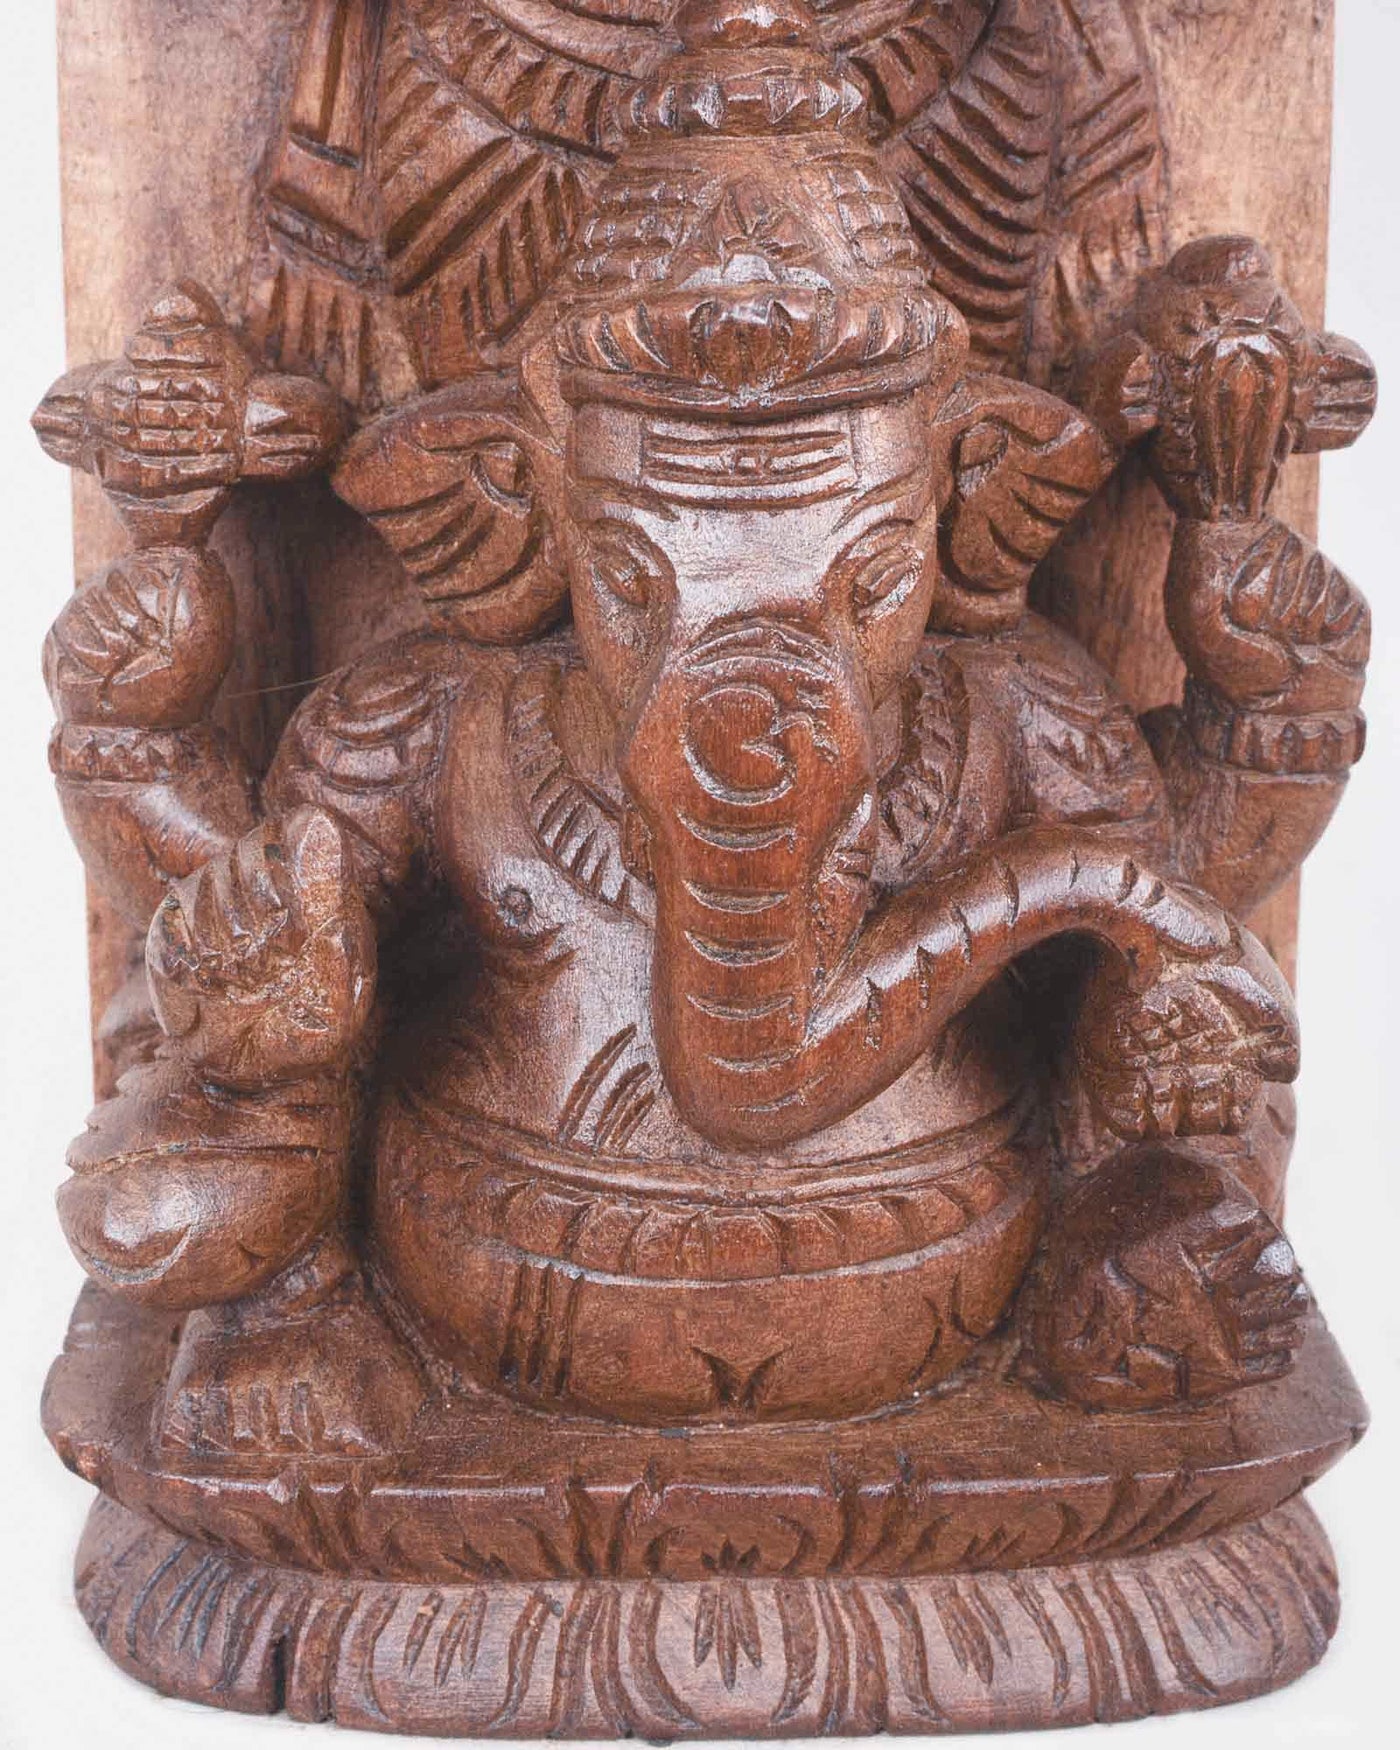 Lord Ganesh&His Mother Goddess Parvathi Wall Mount 13"